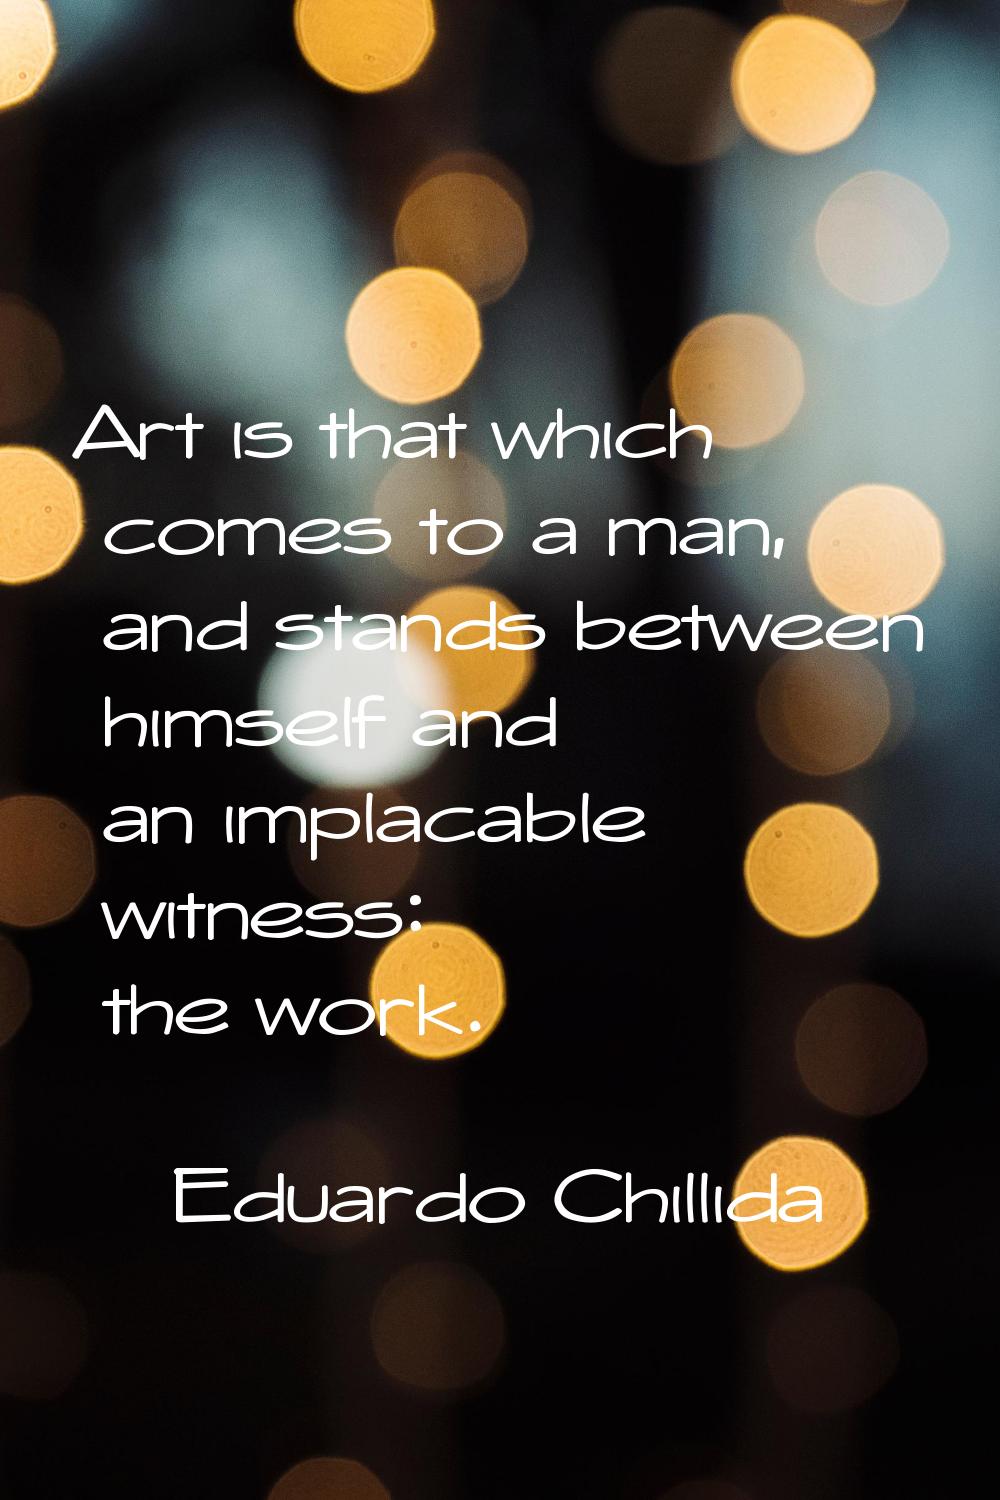 Art is that which comes to a man, and stands between himself and an implacable witness: the work.